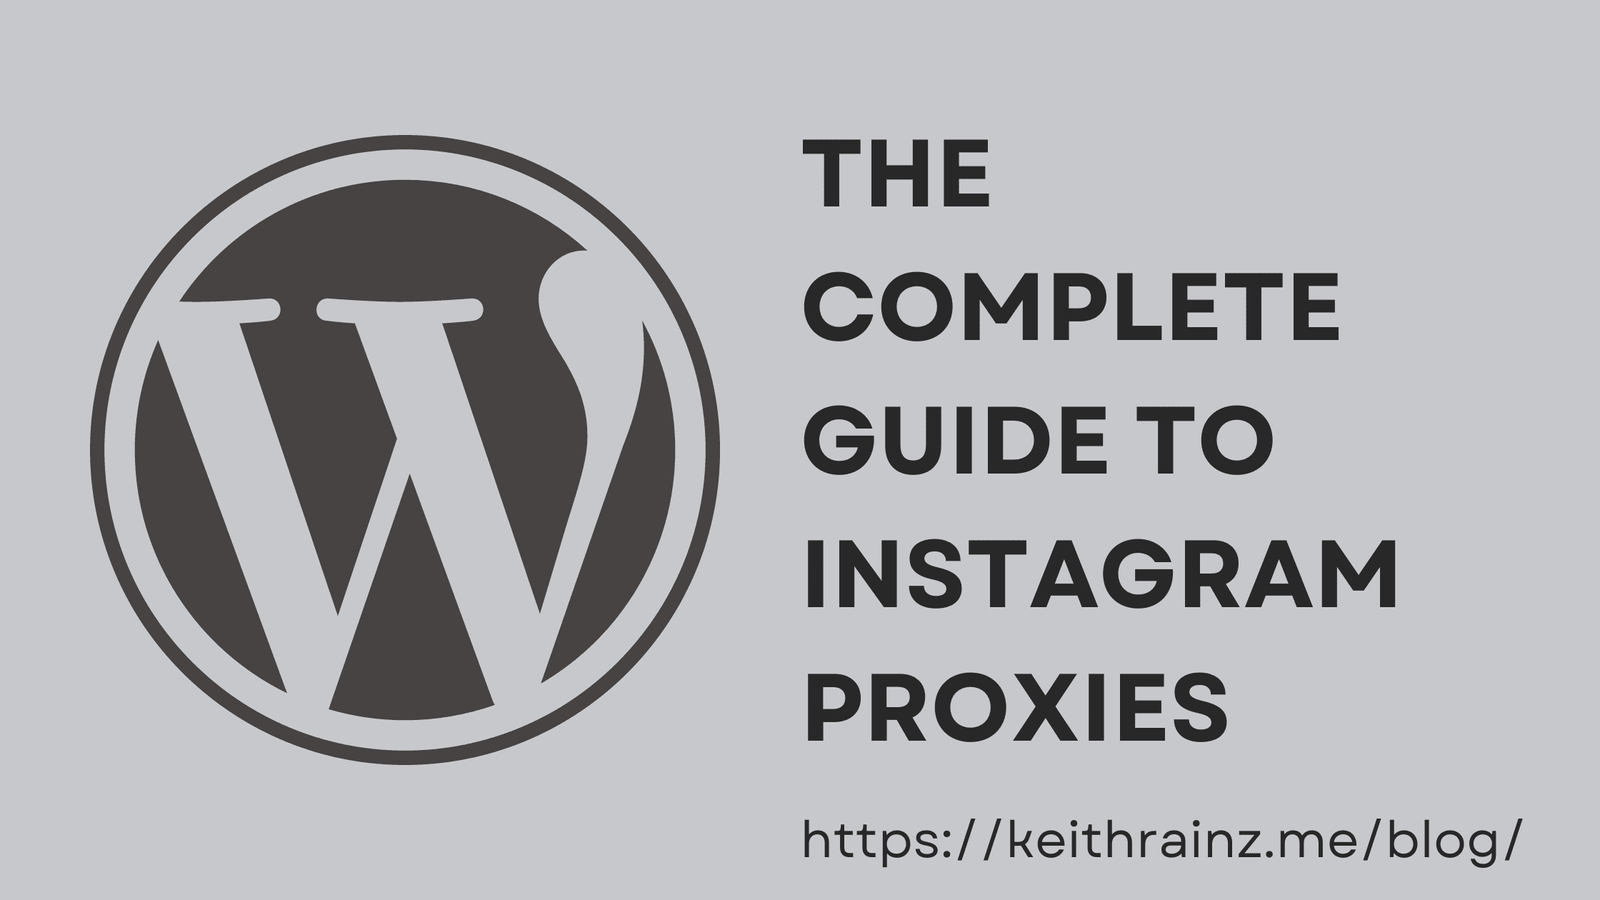 The Complete Guide to Instagram Proxies, Hacks and Tricks You Need to Know